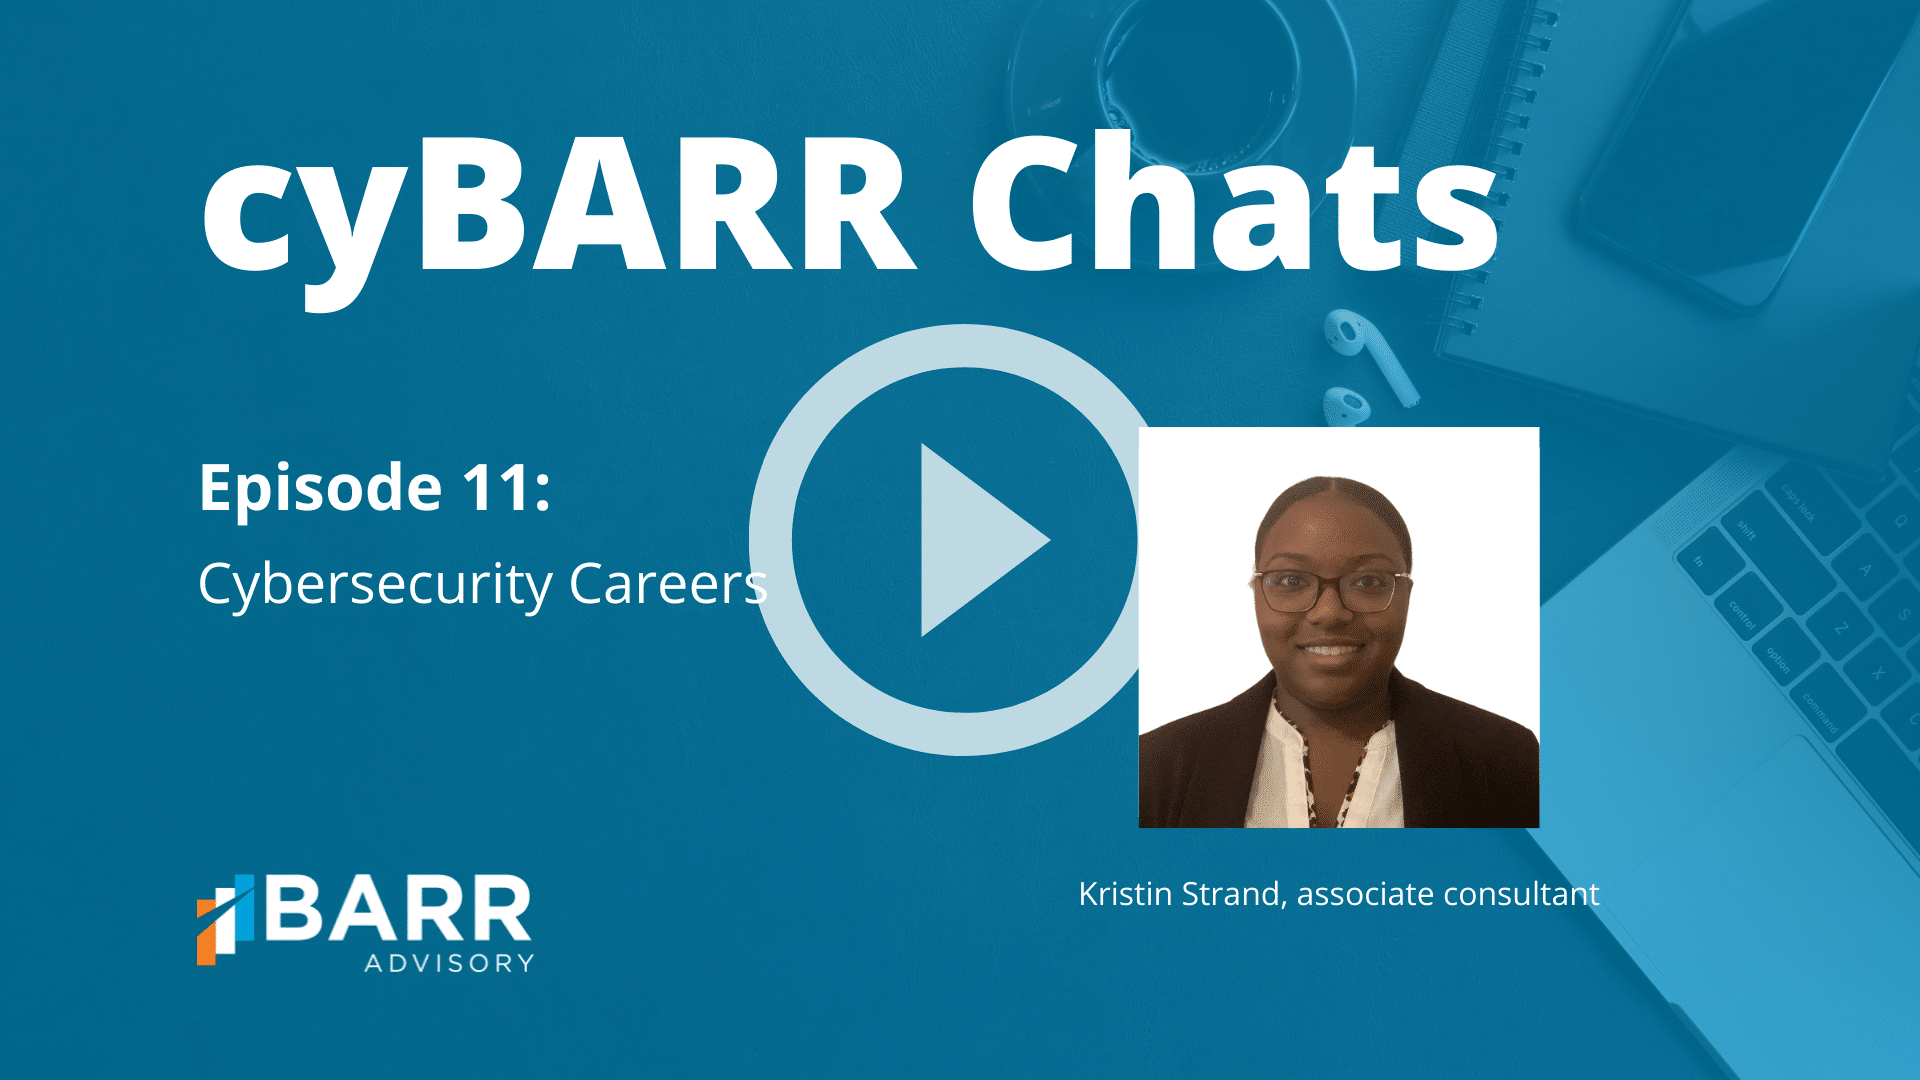 cyBARR Chats Episode 11: Cybersecurity Careers